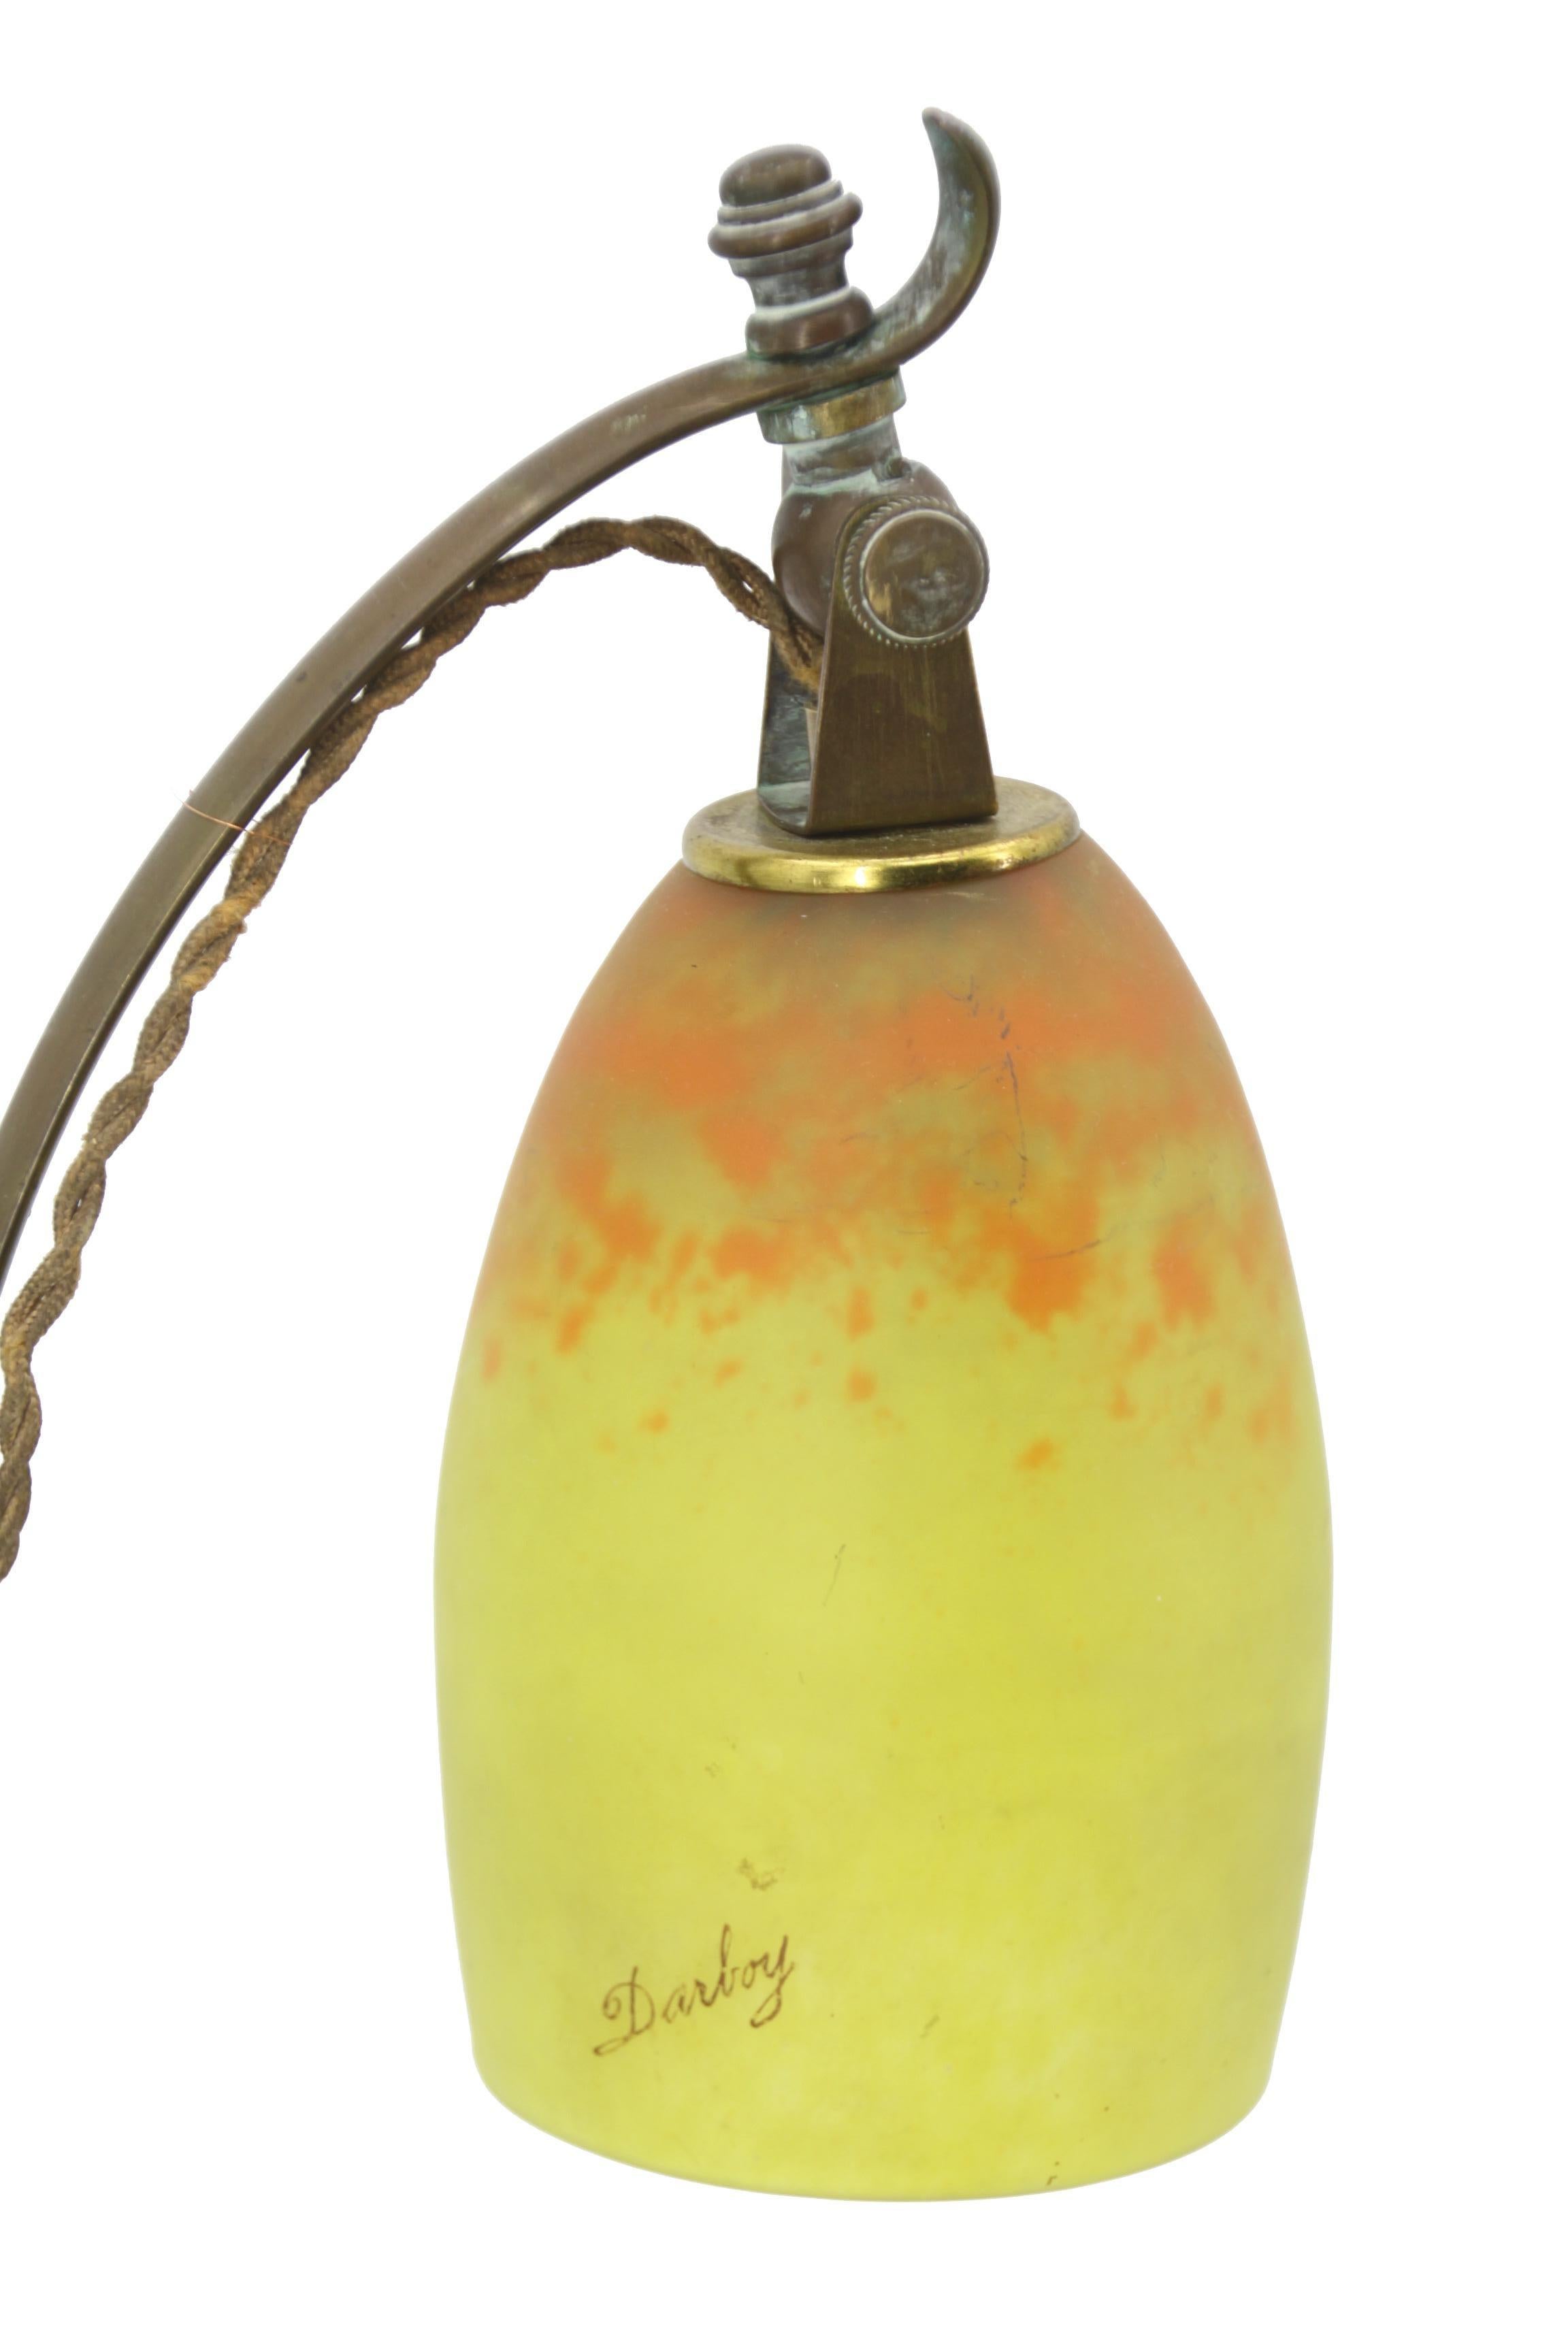 Muller Frères - signed with enamel, DARBOY

Set of very beautiful Art Nouveau lamps circa 1910/1920, made of bronze and cloud (red yellow) glass, 1920 era, the same than Muller Frères but signed with enamel, DARBOY. The lamps have the same base